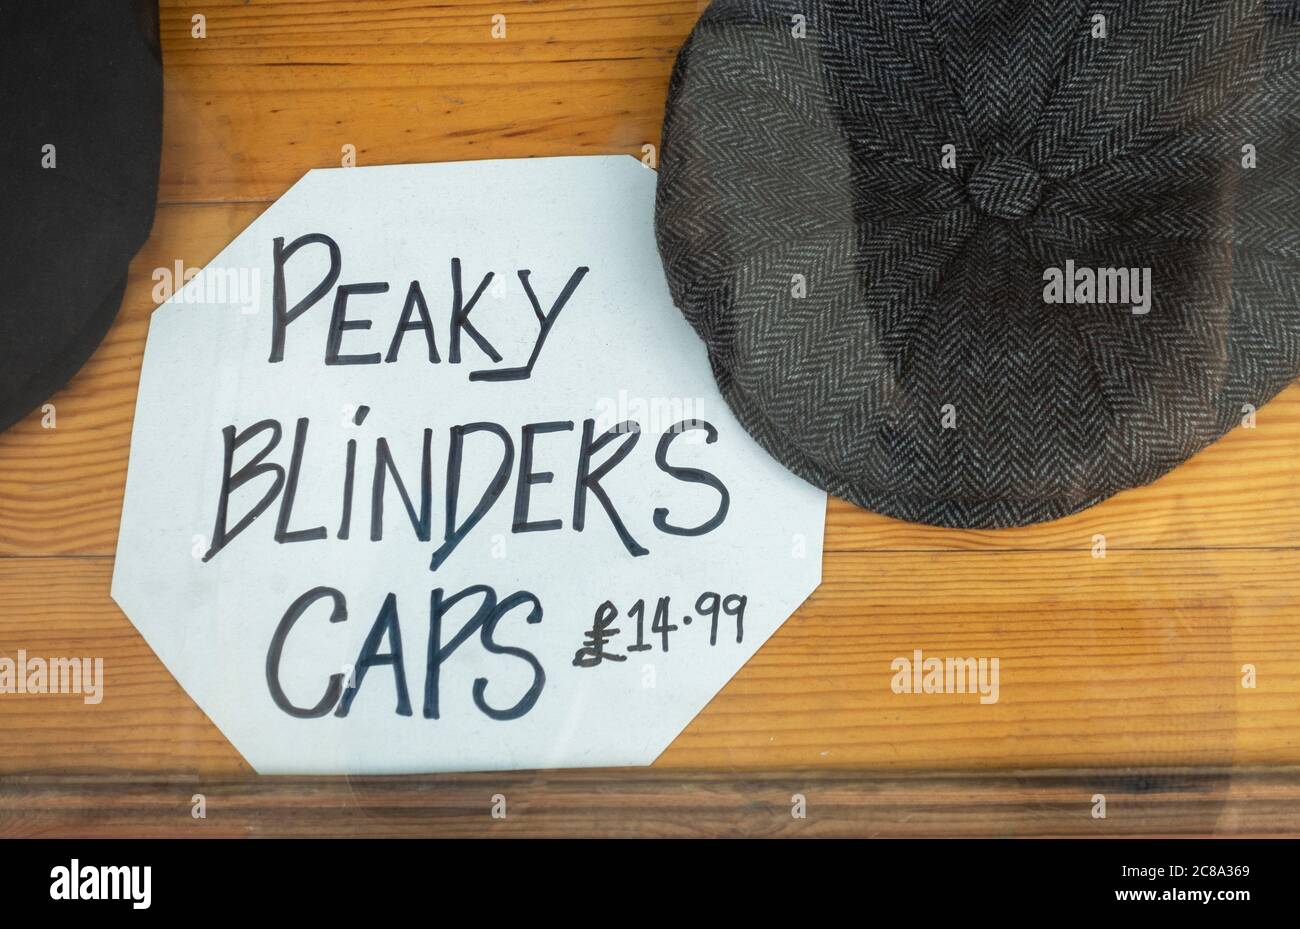 Peaky Blinder caps for sale in Liverpool shop Stock Photo